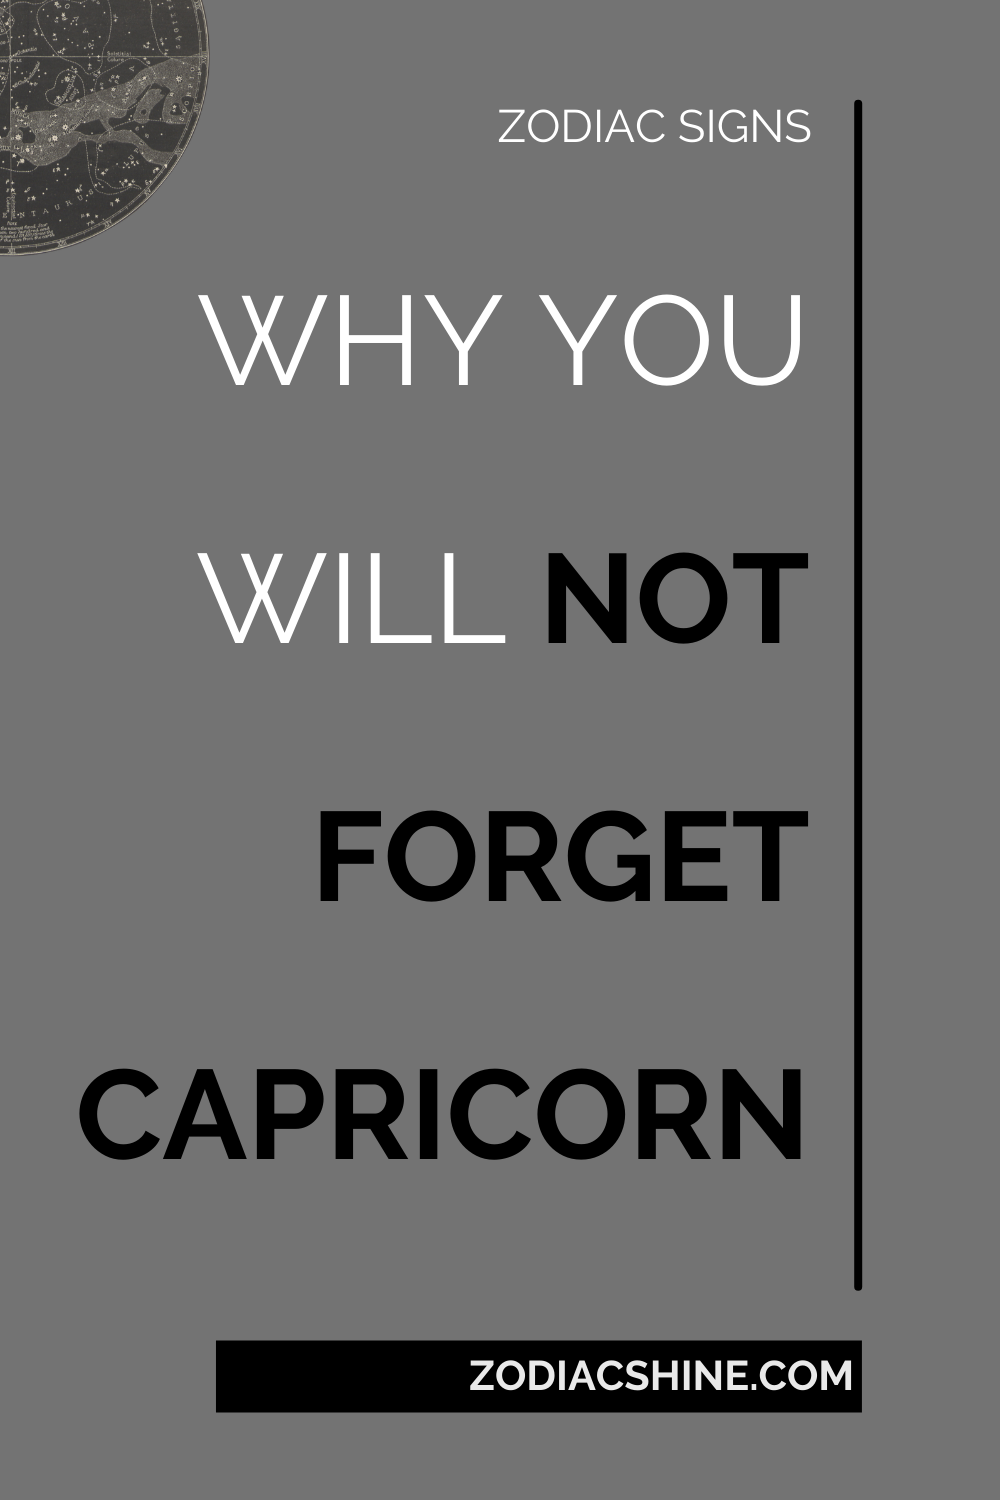 Why You Will Not Forget Capricorn